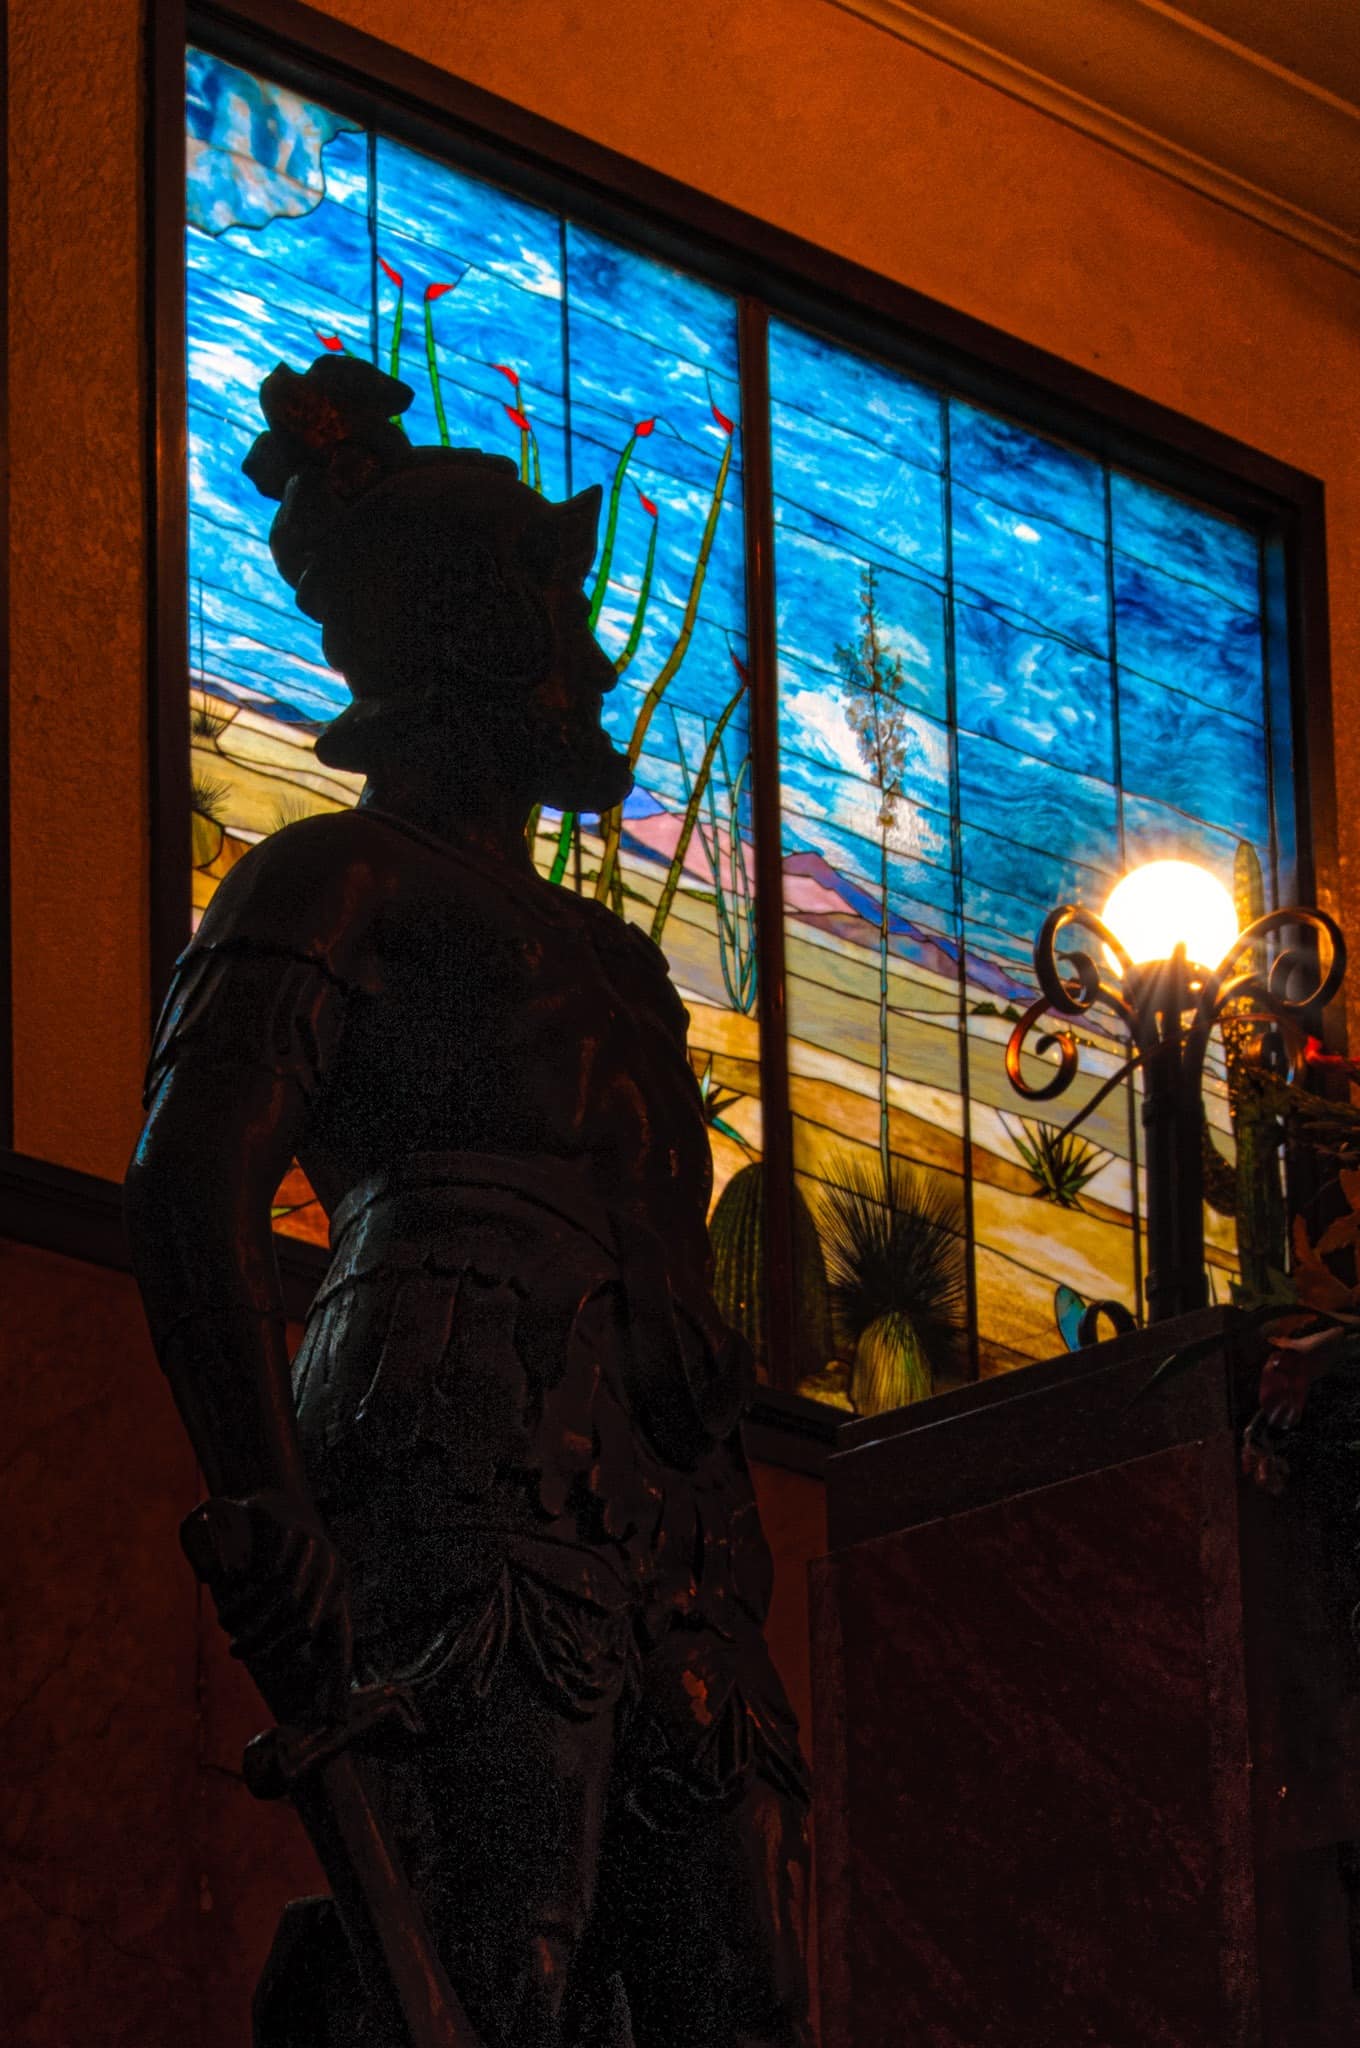 A silhouette of a conquistador, in honor of the Gadsden Purchase, stands next to the grand staircase in the lobby of the Gadsden Hotel in Douglas, Arizona.